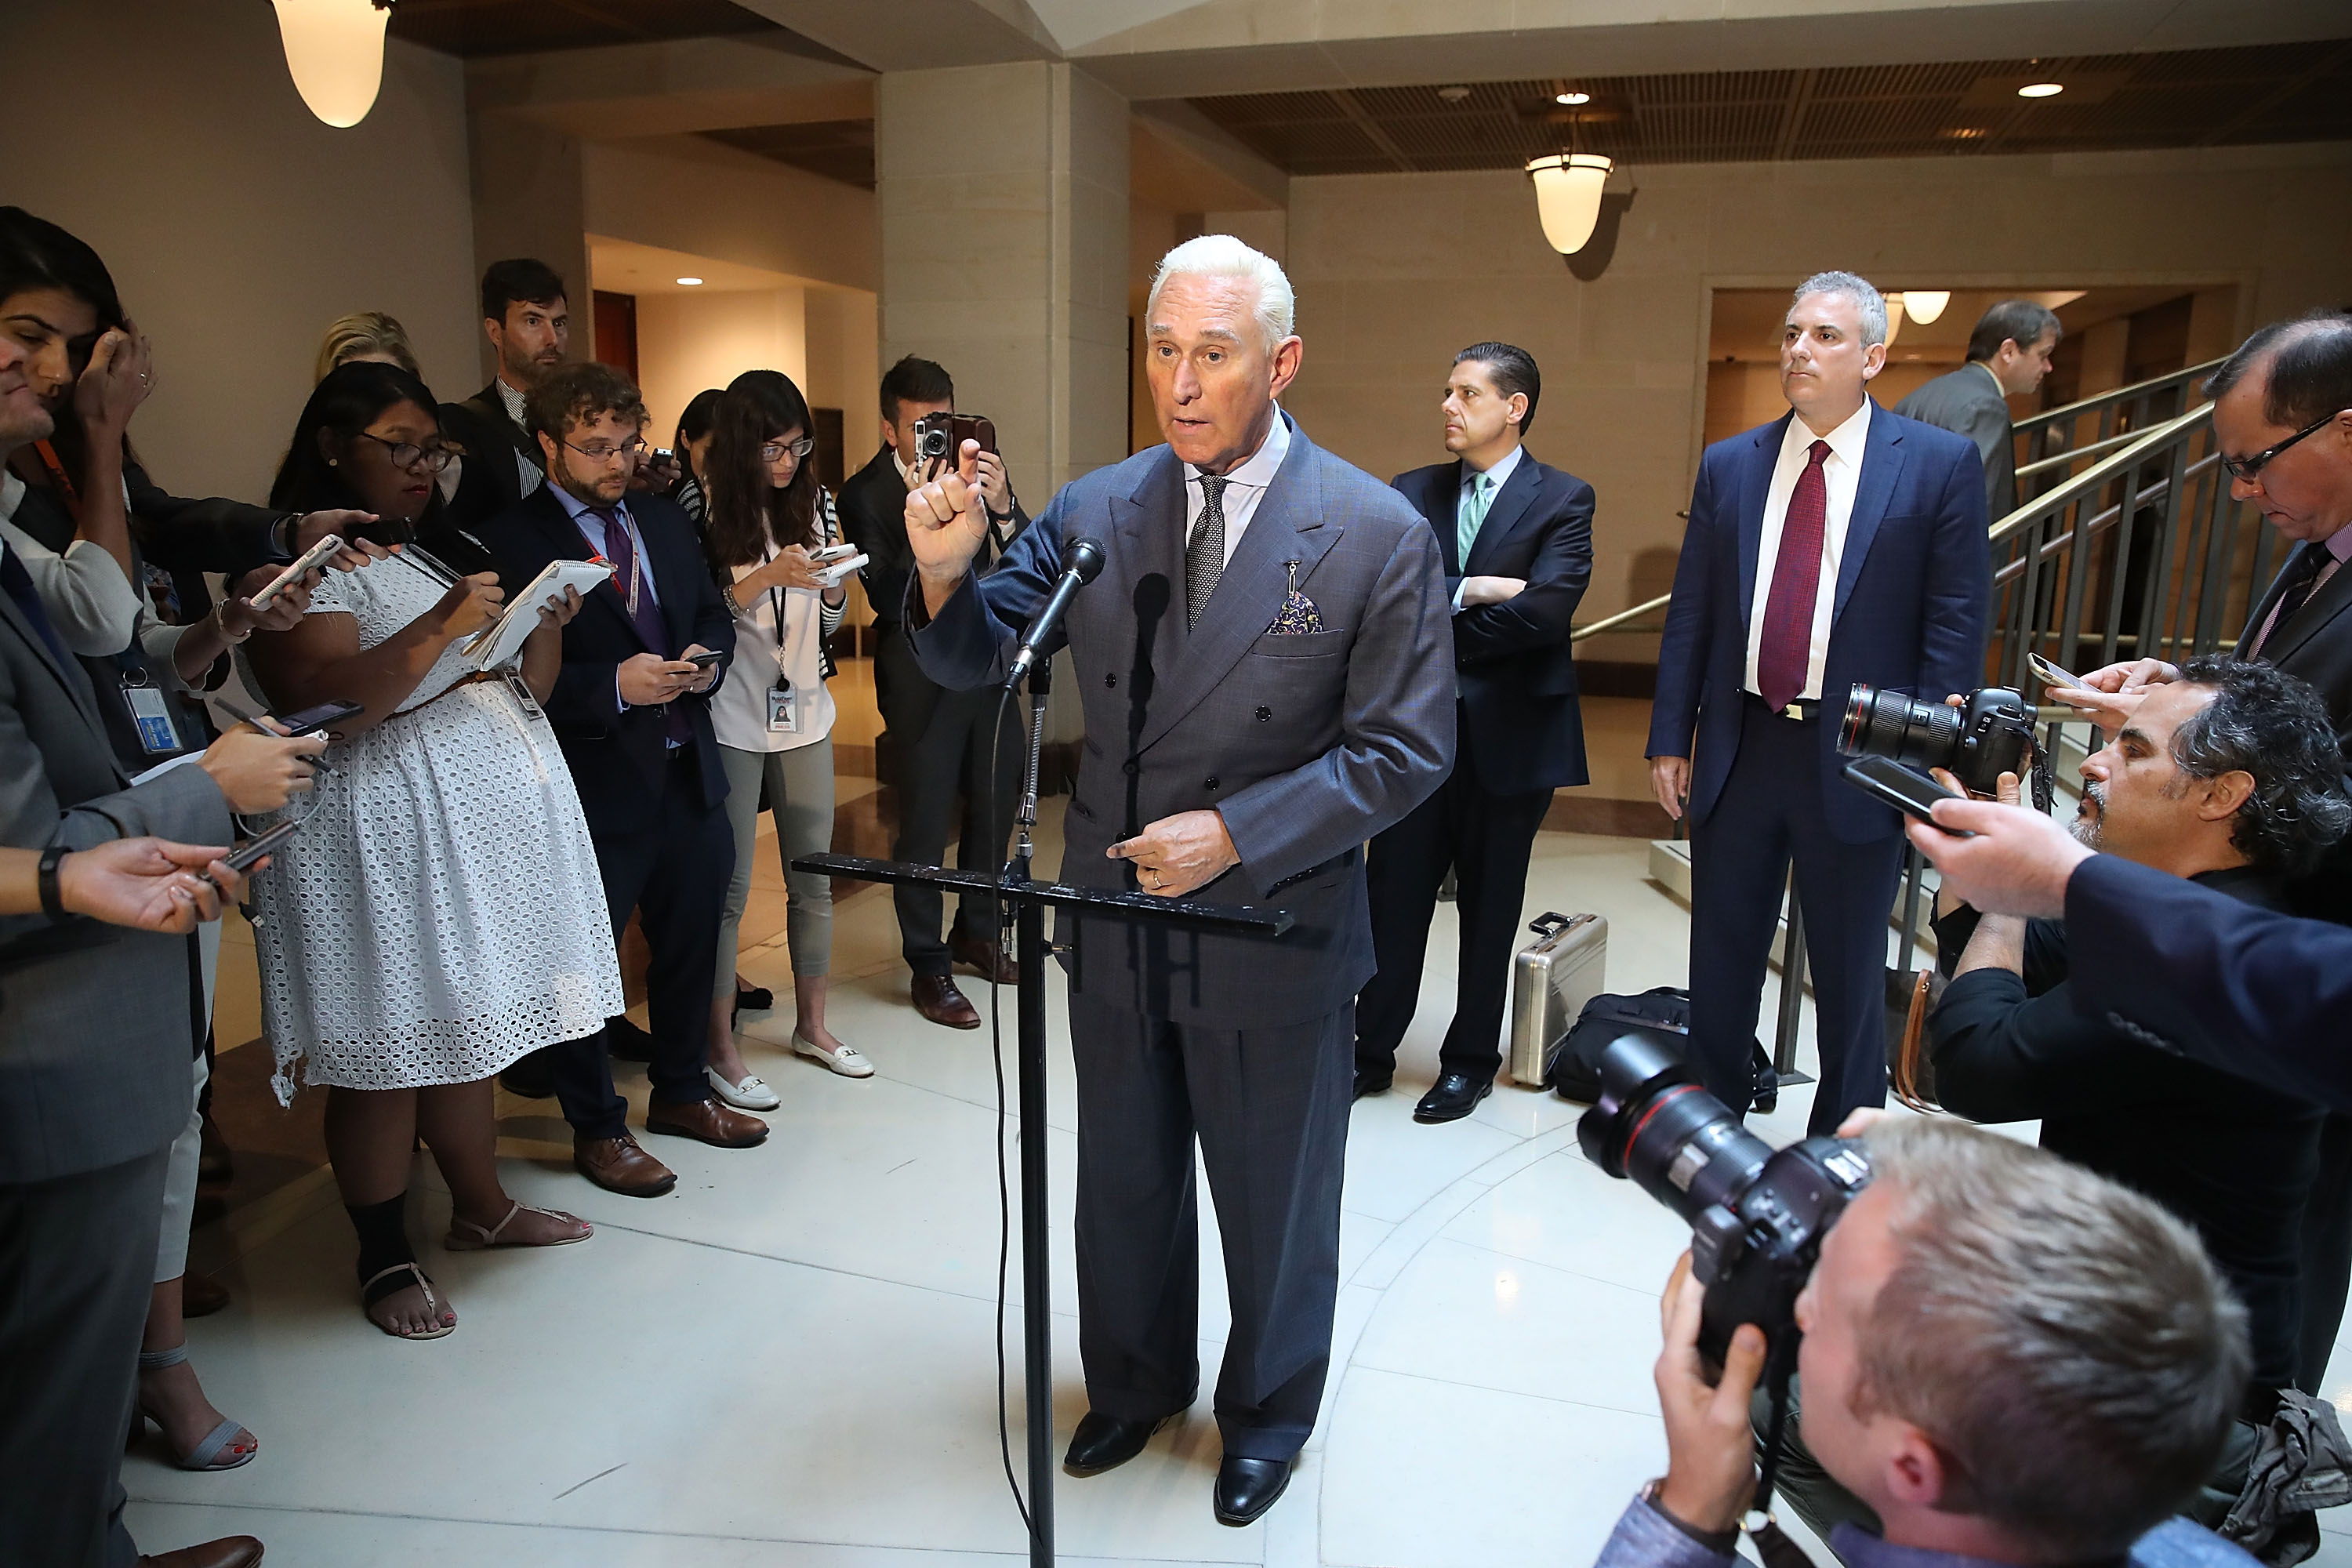 Roger Stone, former confidant to President Trump, speaks to the media after appearing before the House Intelligence Committee during a closed door hearing on September 26, 2017. (Mark Wilson—Getty Images)